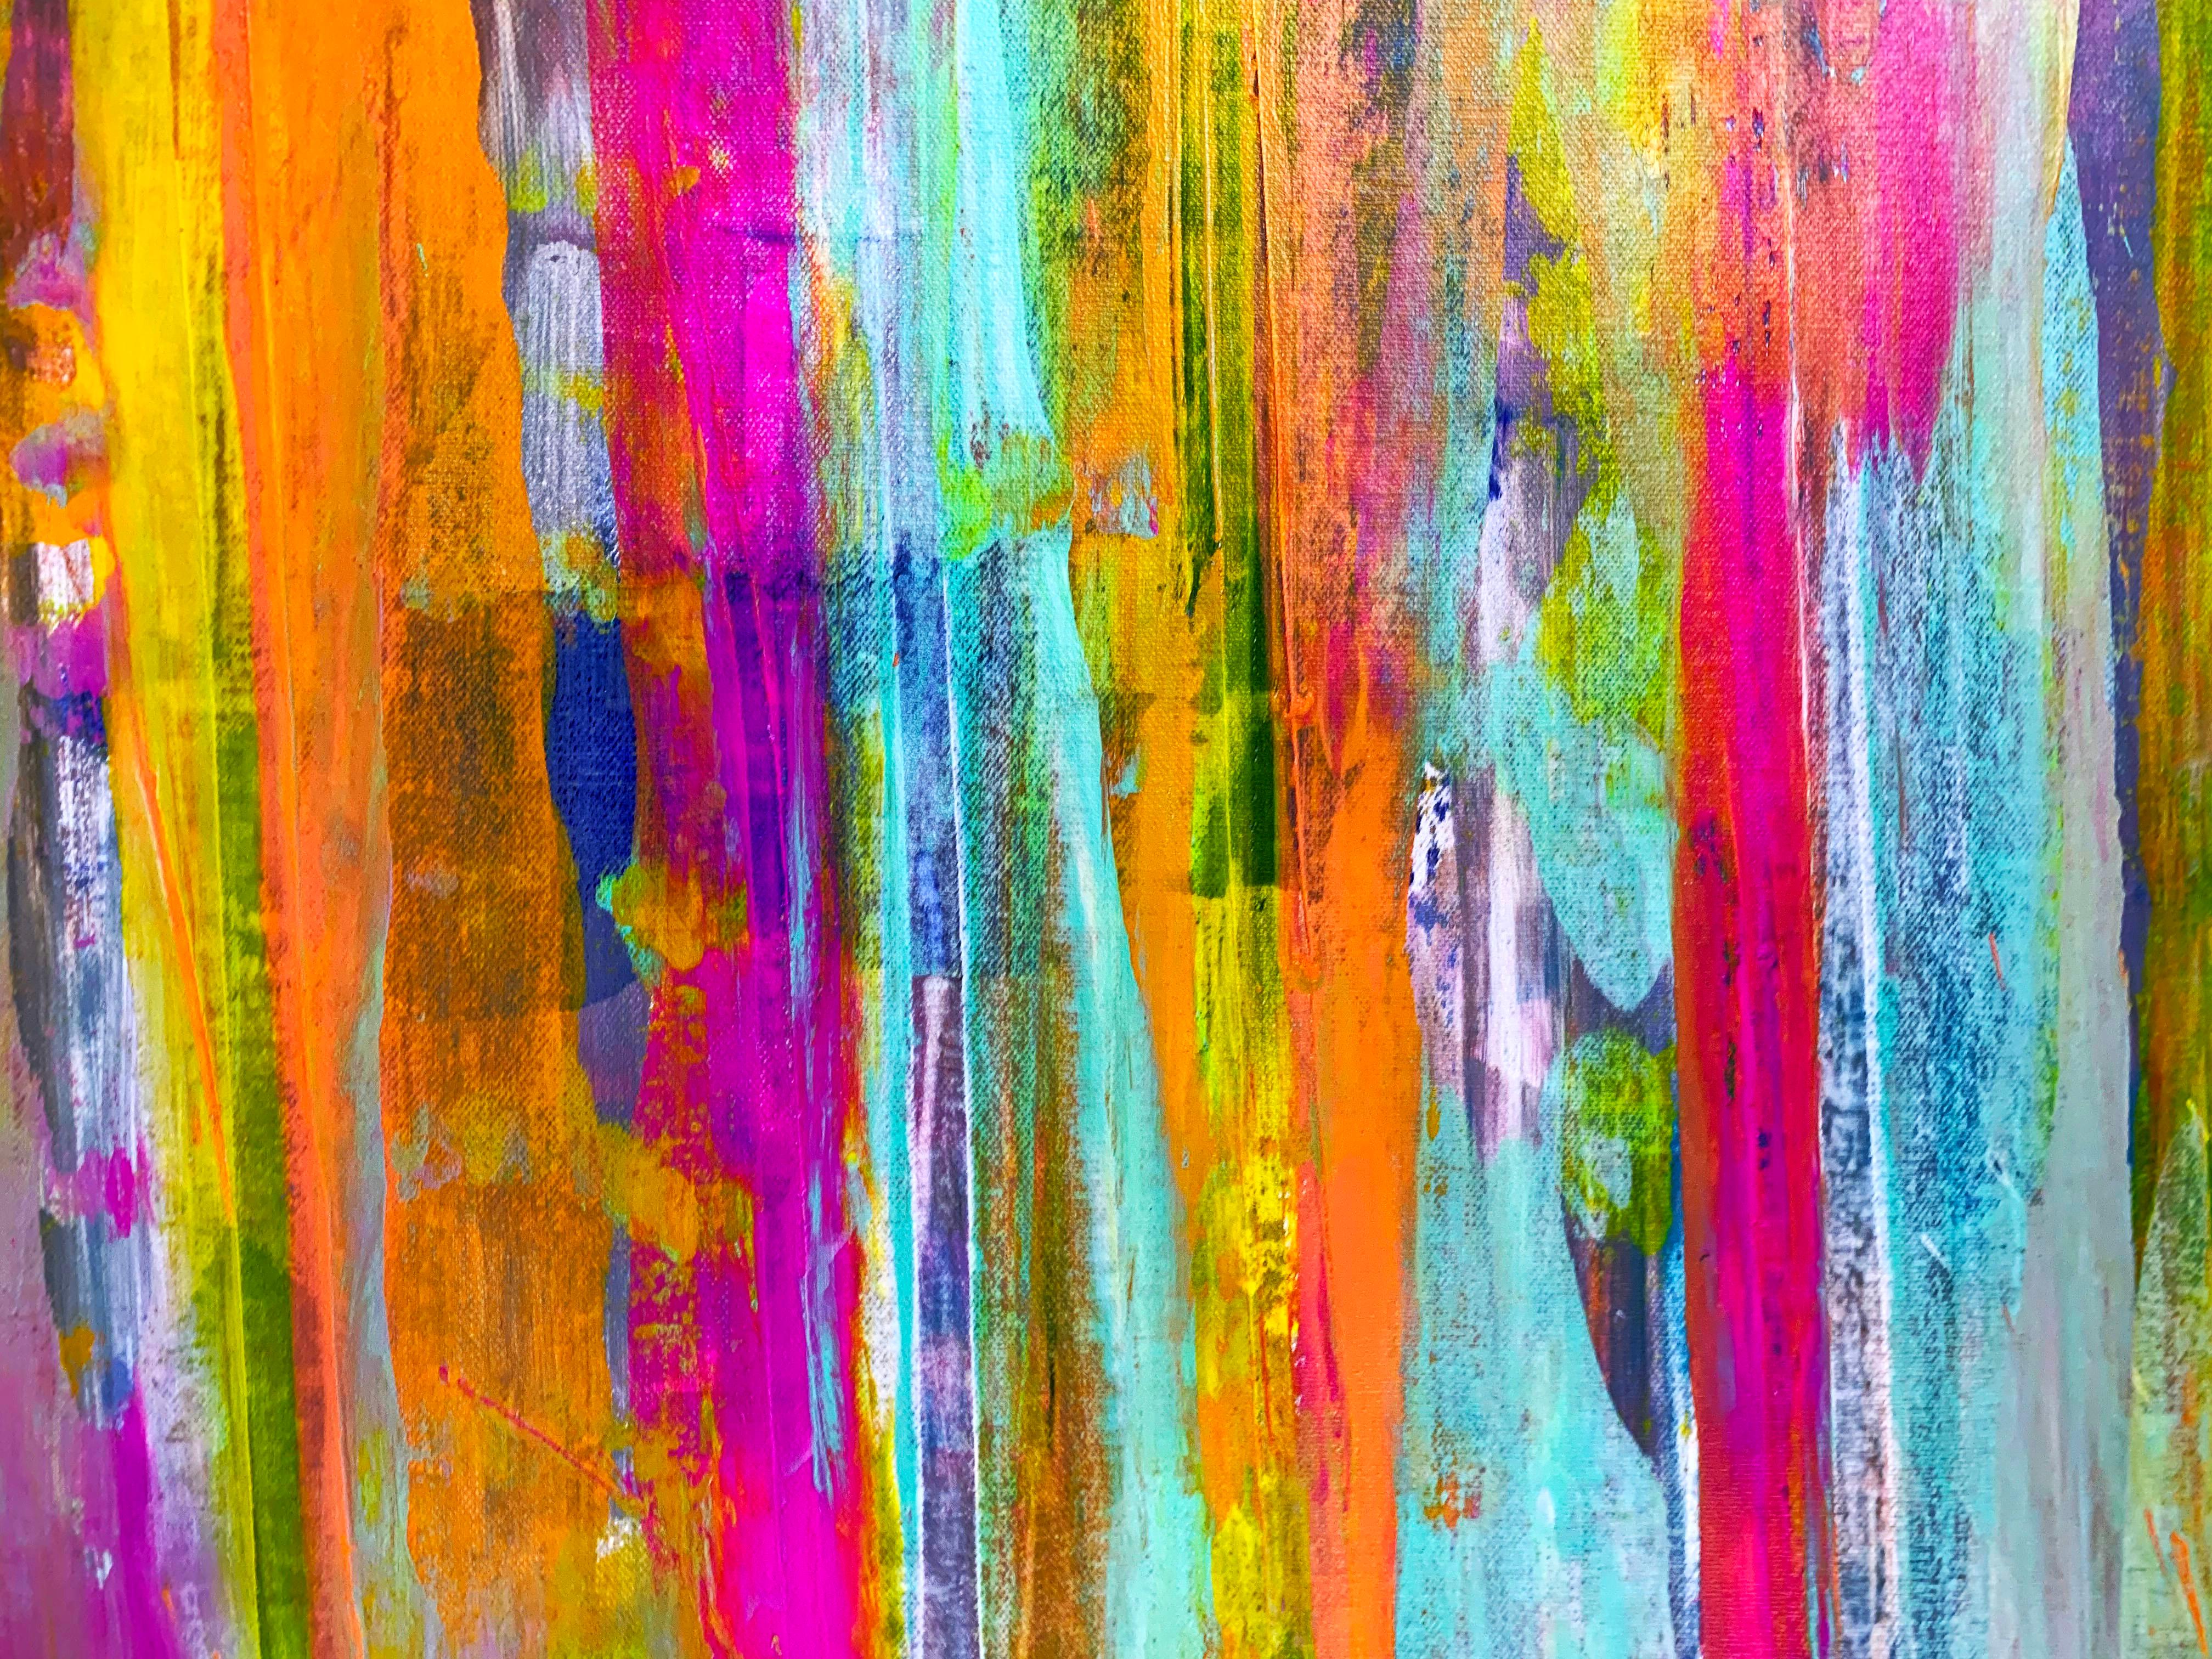 Coloured Waterfall - Abstract Expressionist Painting by Estelle Asmodelle